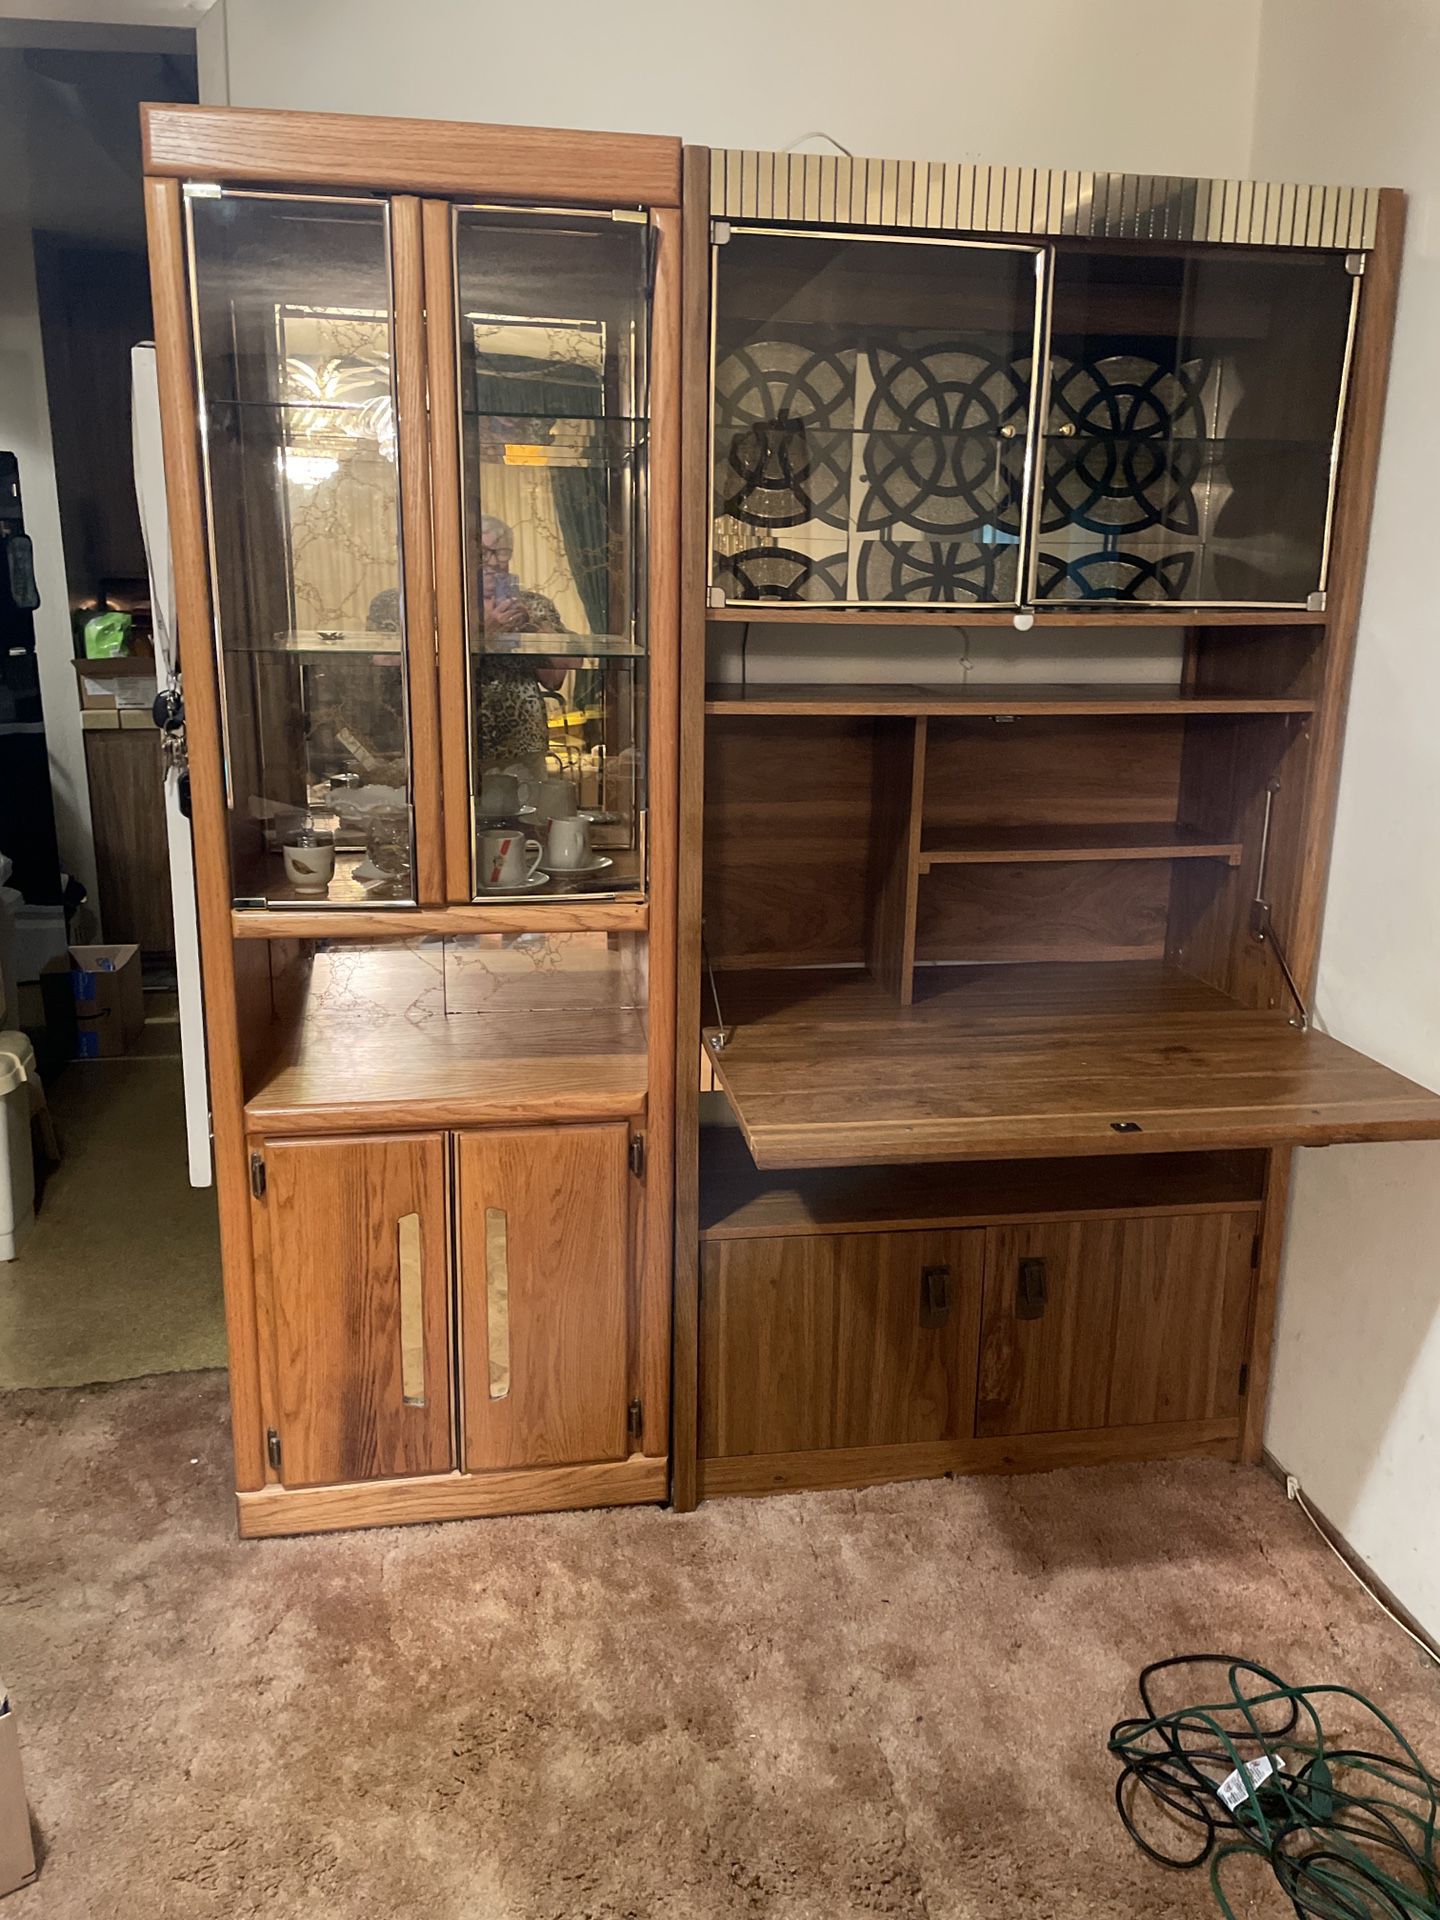 2 Separate Cabinets